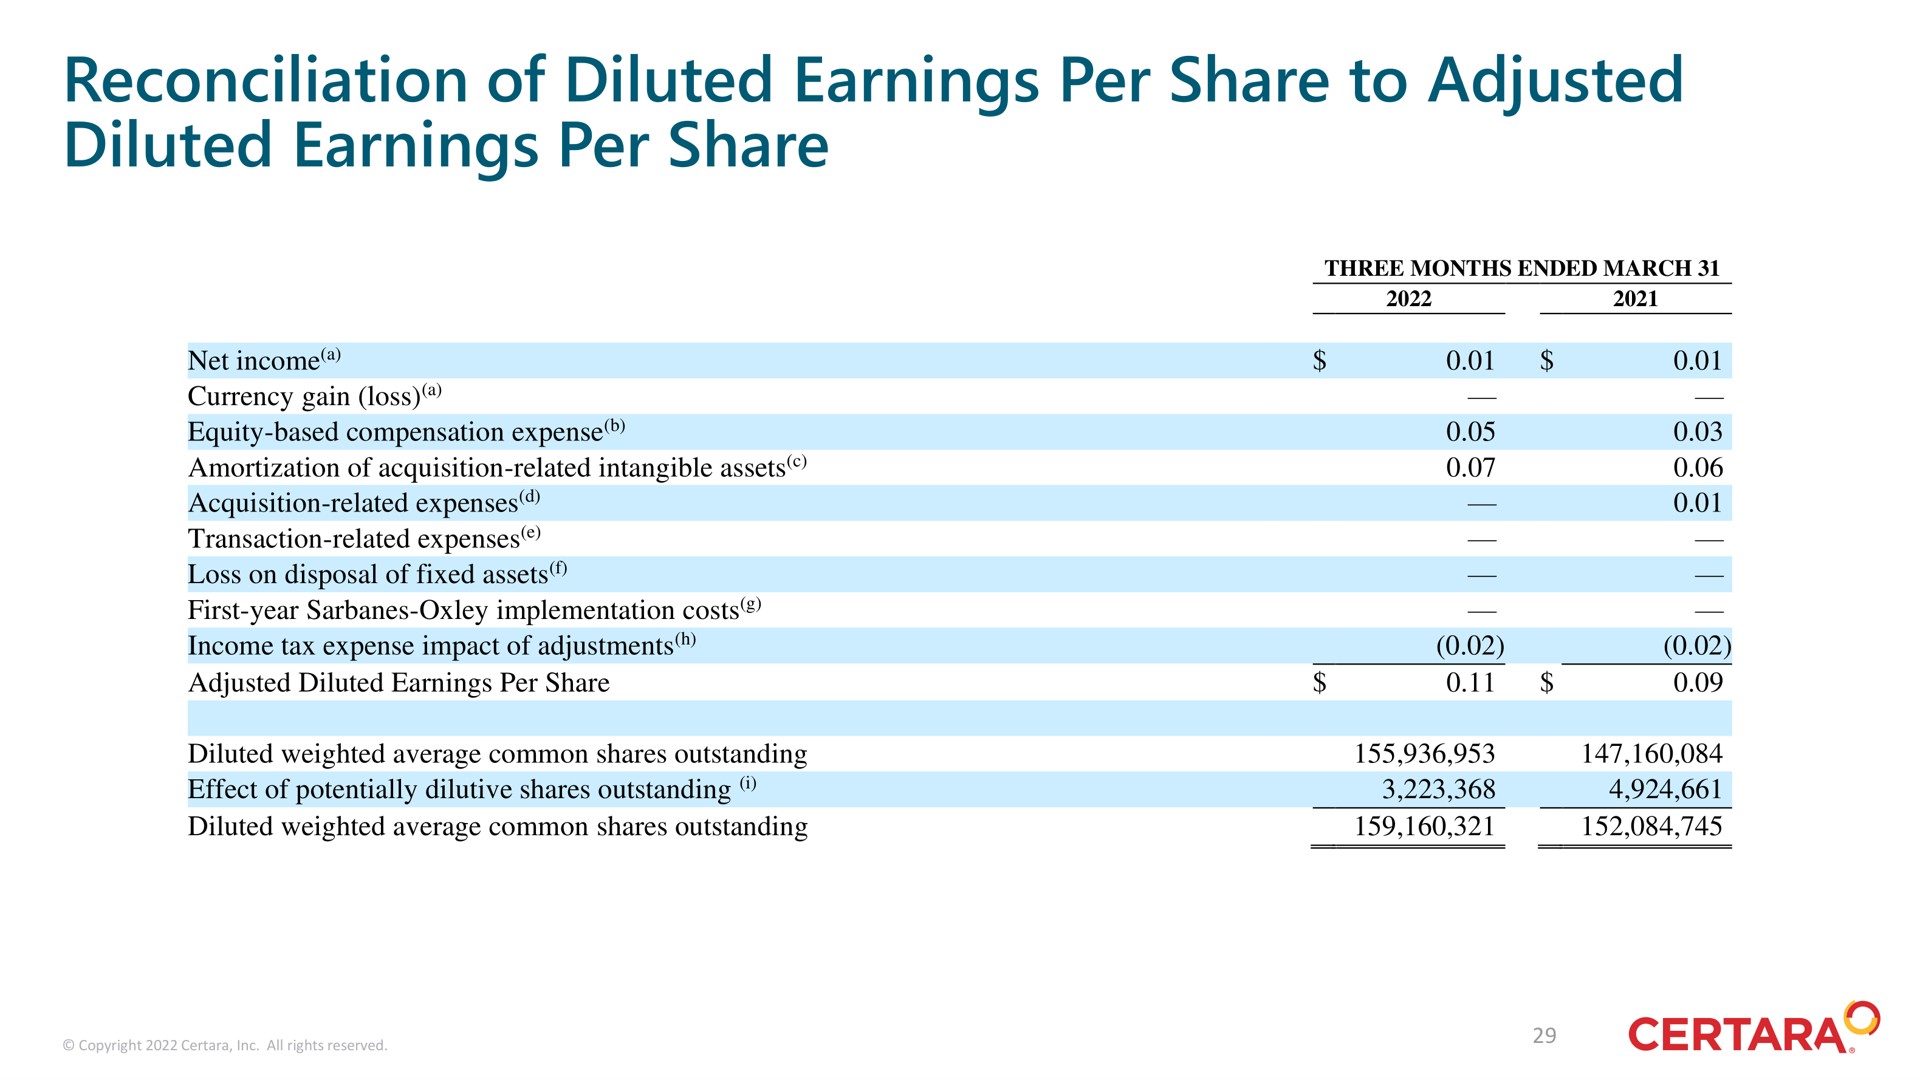 reconciliation of diluted earnings per share to adjusted diluted earnings per share | Certara